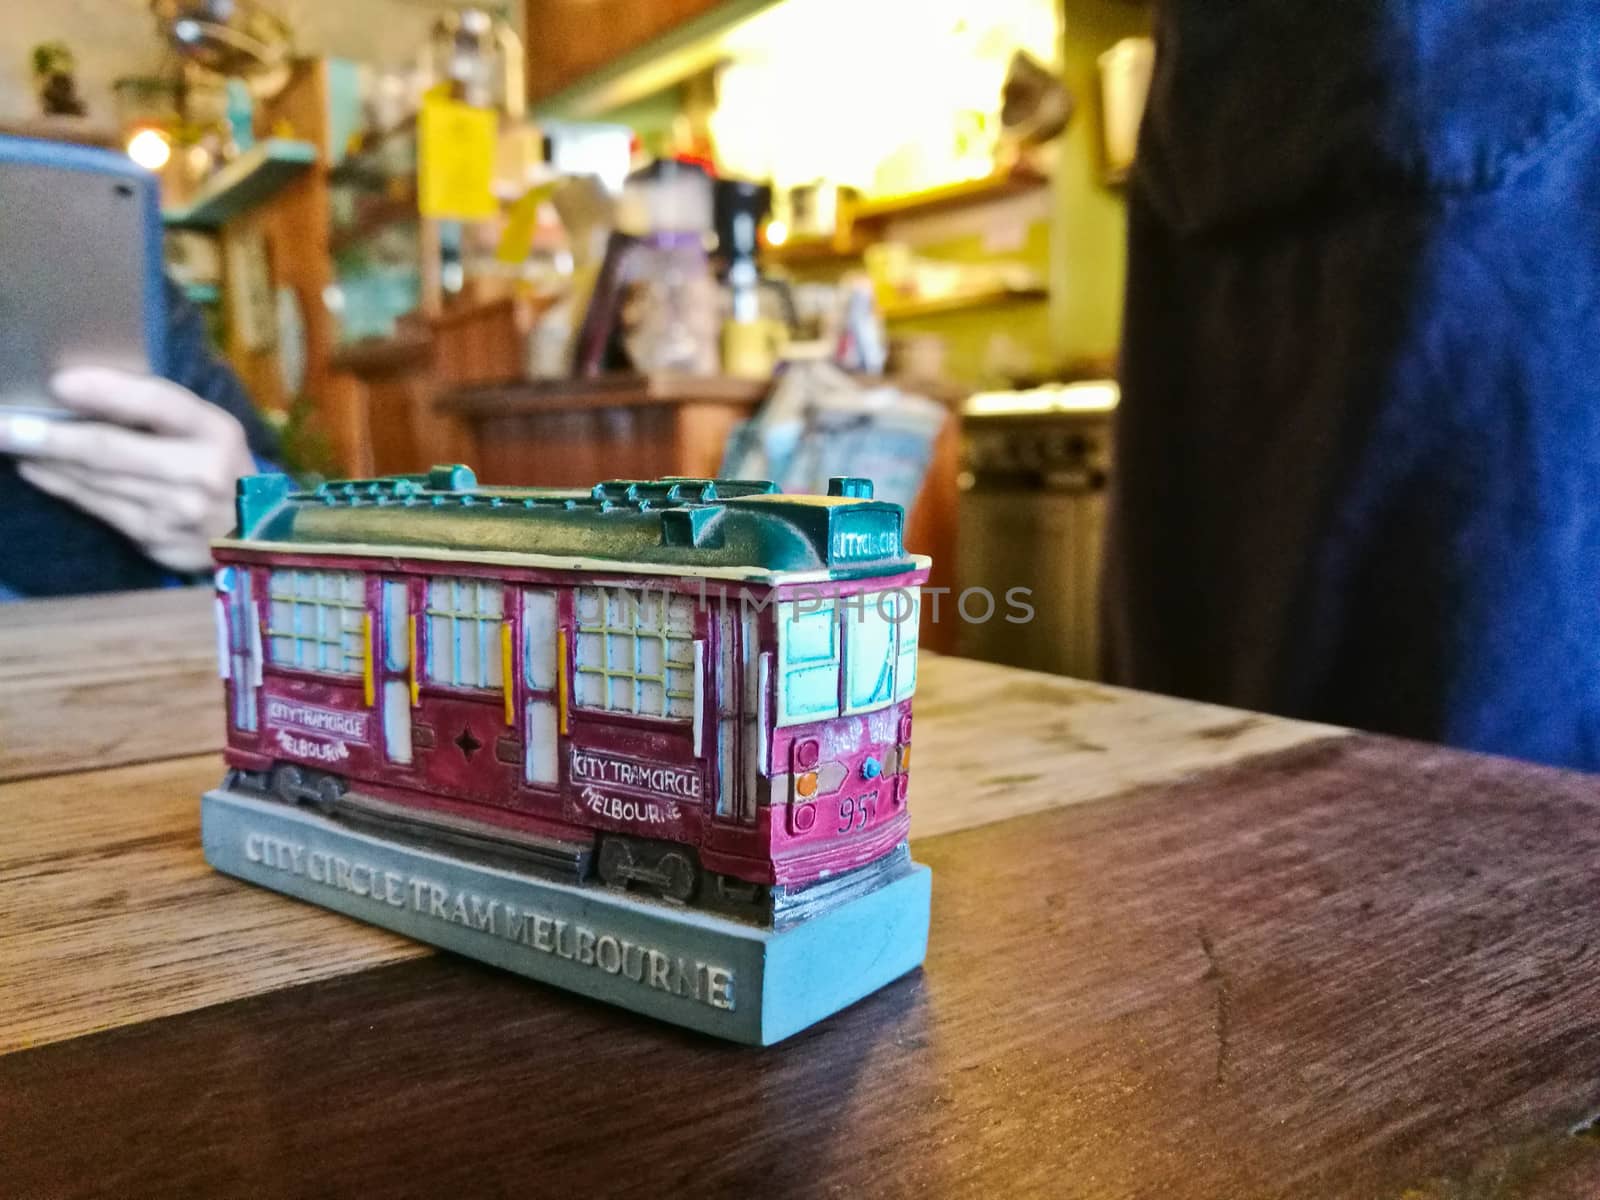 Little tiny Melbourne toy model in a cozy restaurant with many people